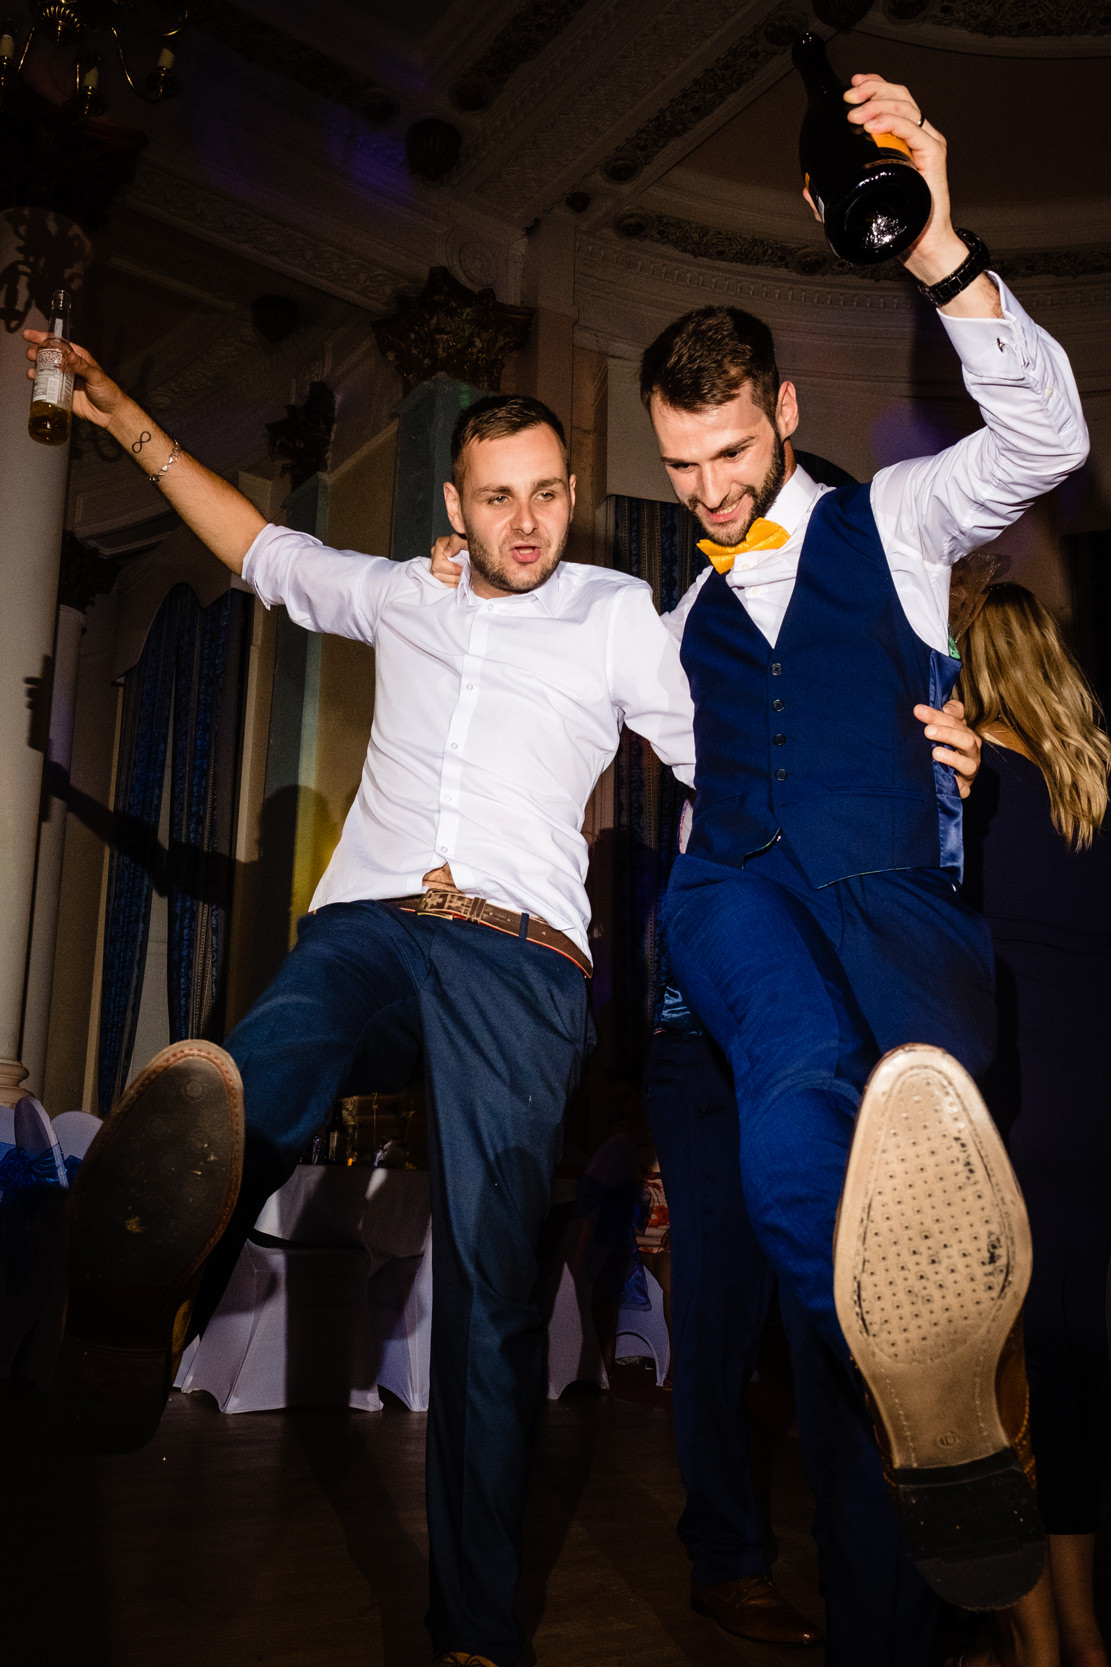 groom dancing with groomsman. grand hotel scarborough wedding photography by emma and rich.